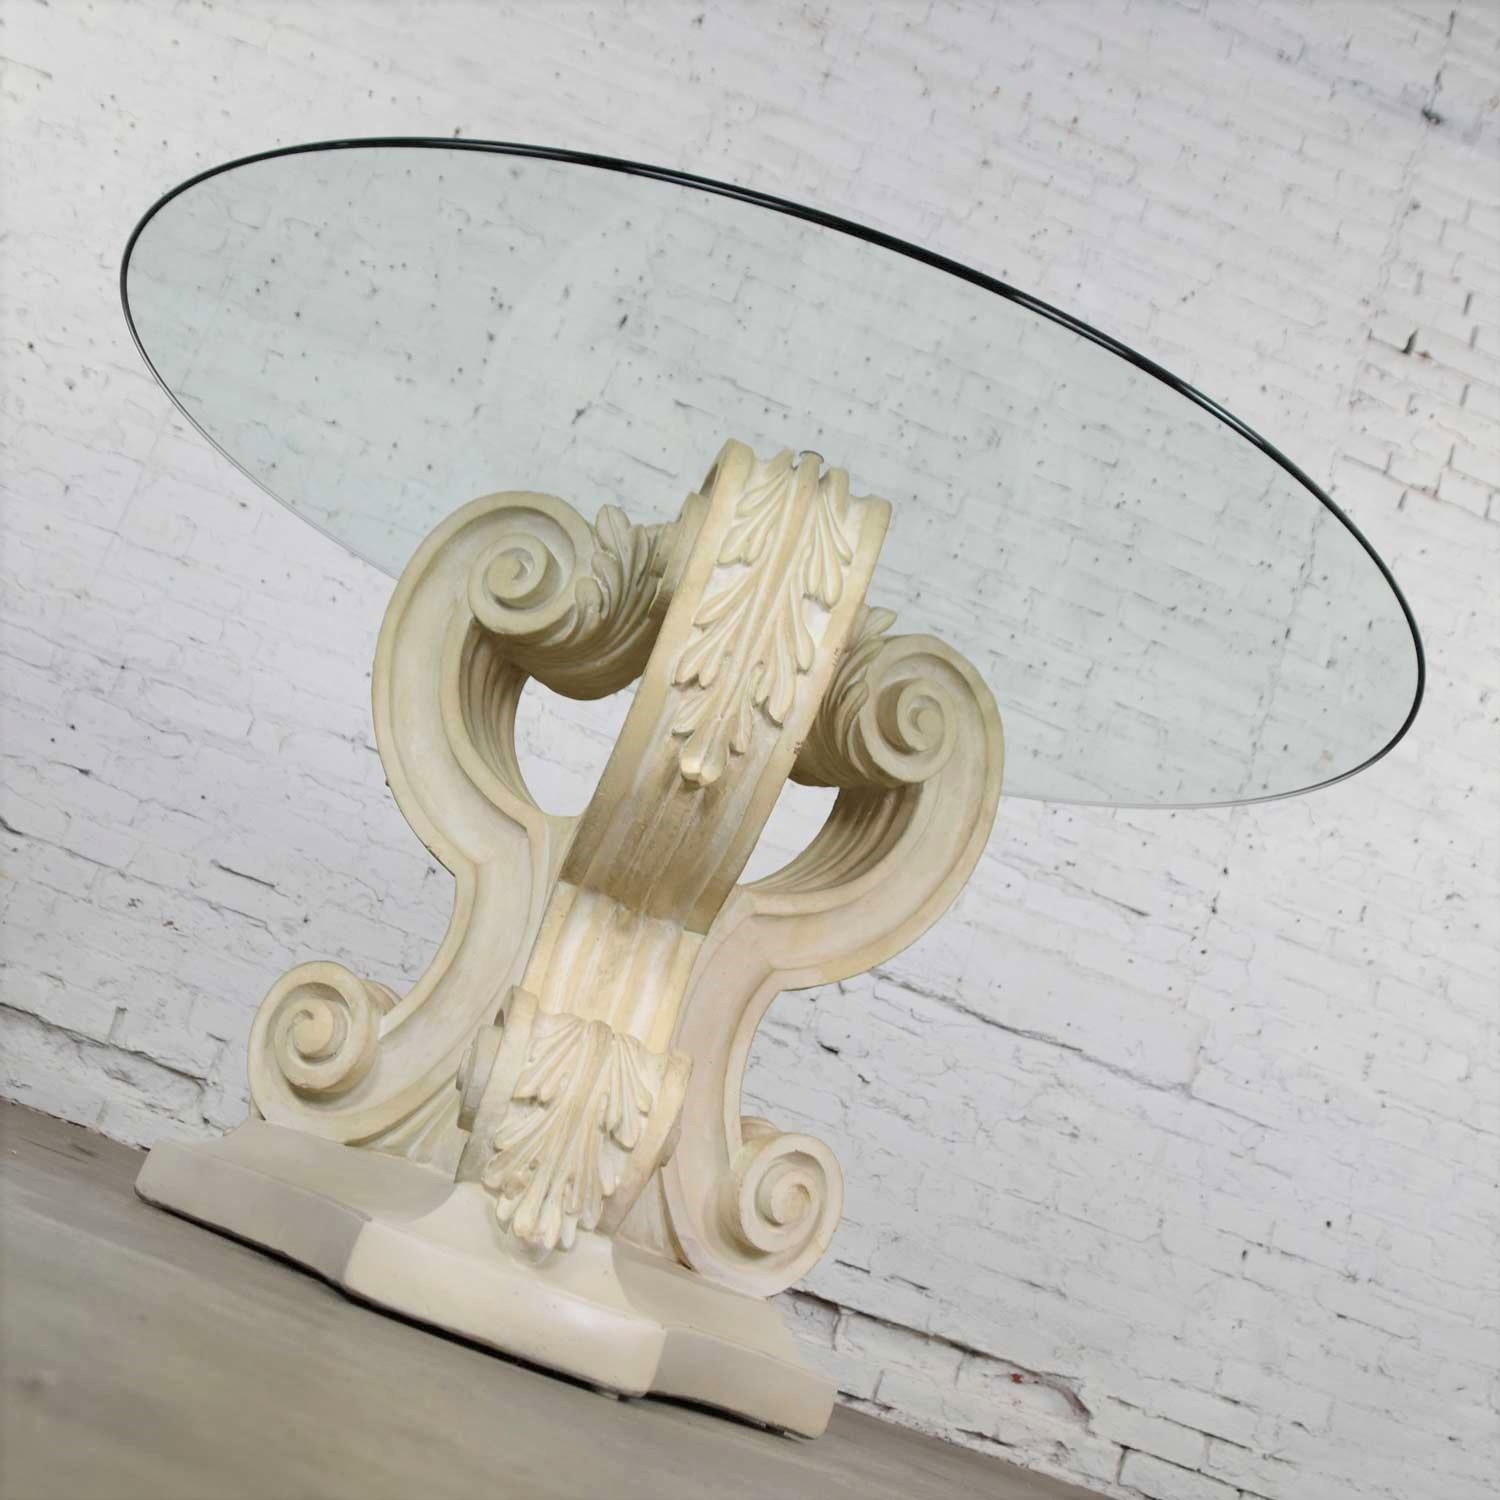 Unknown Neoclassical Architectural Plaster Pedestal Dining or Center Table Round Glass